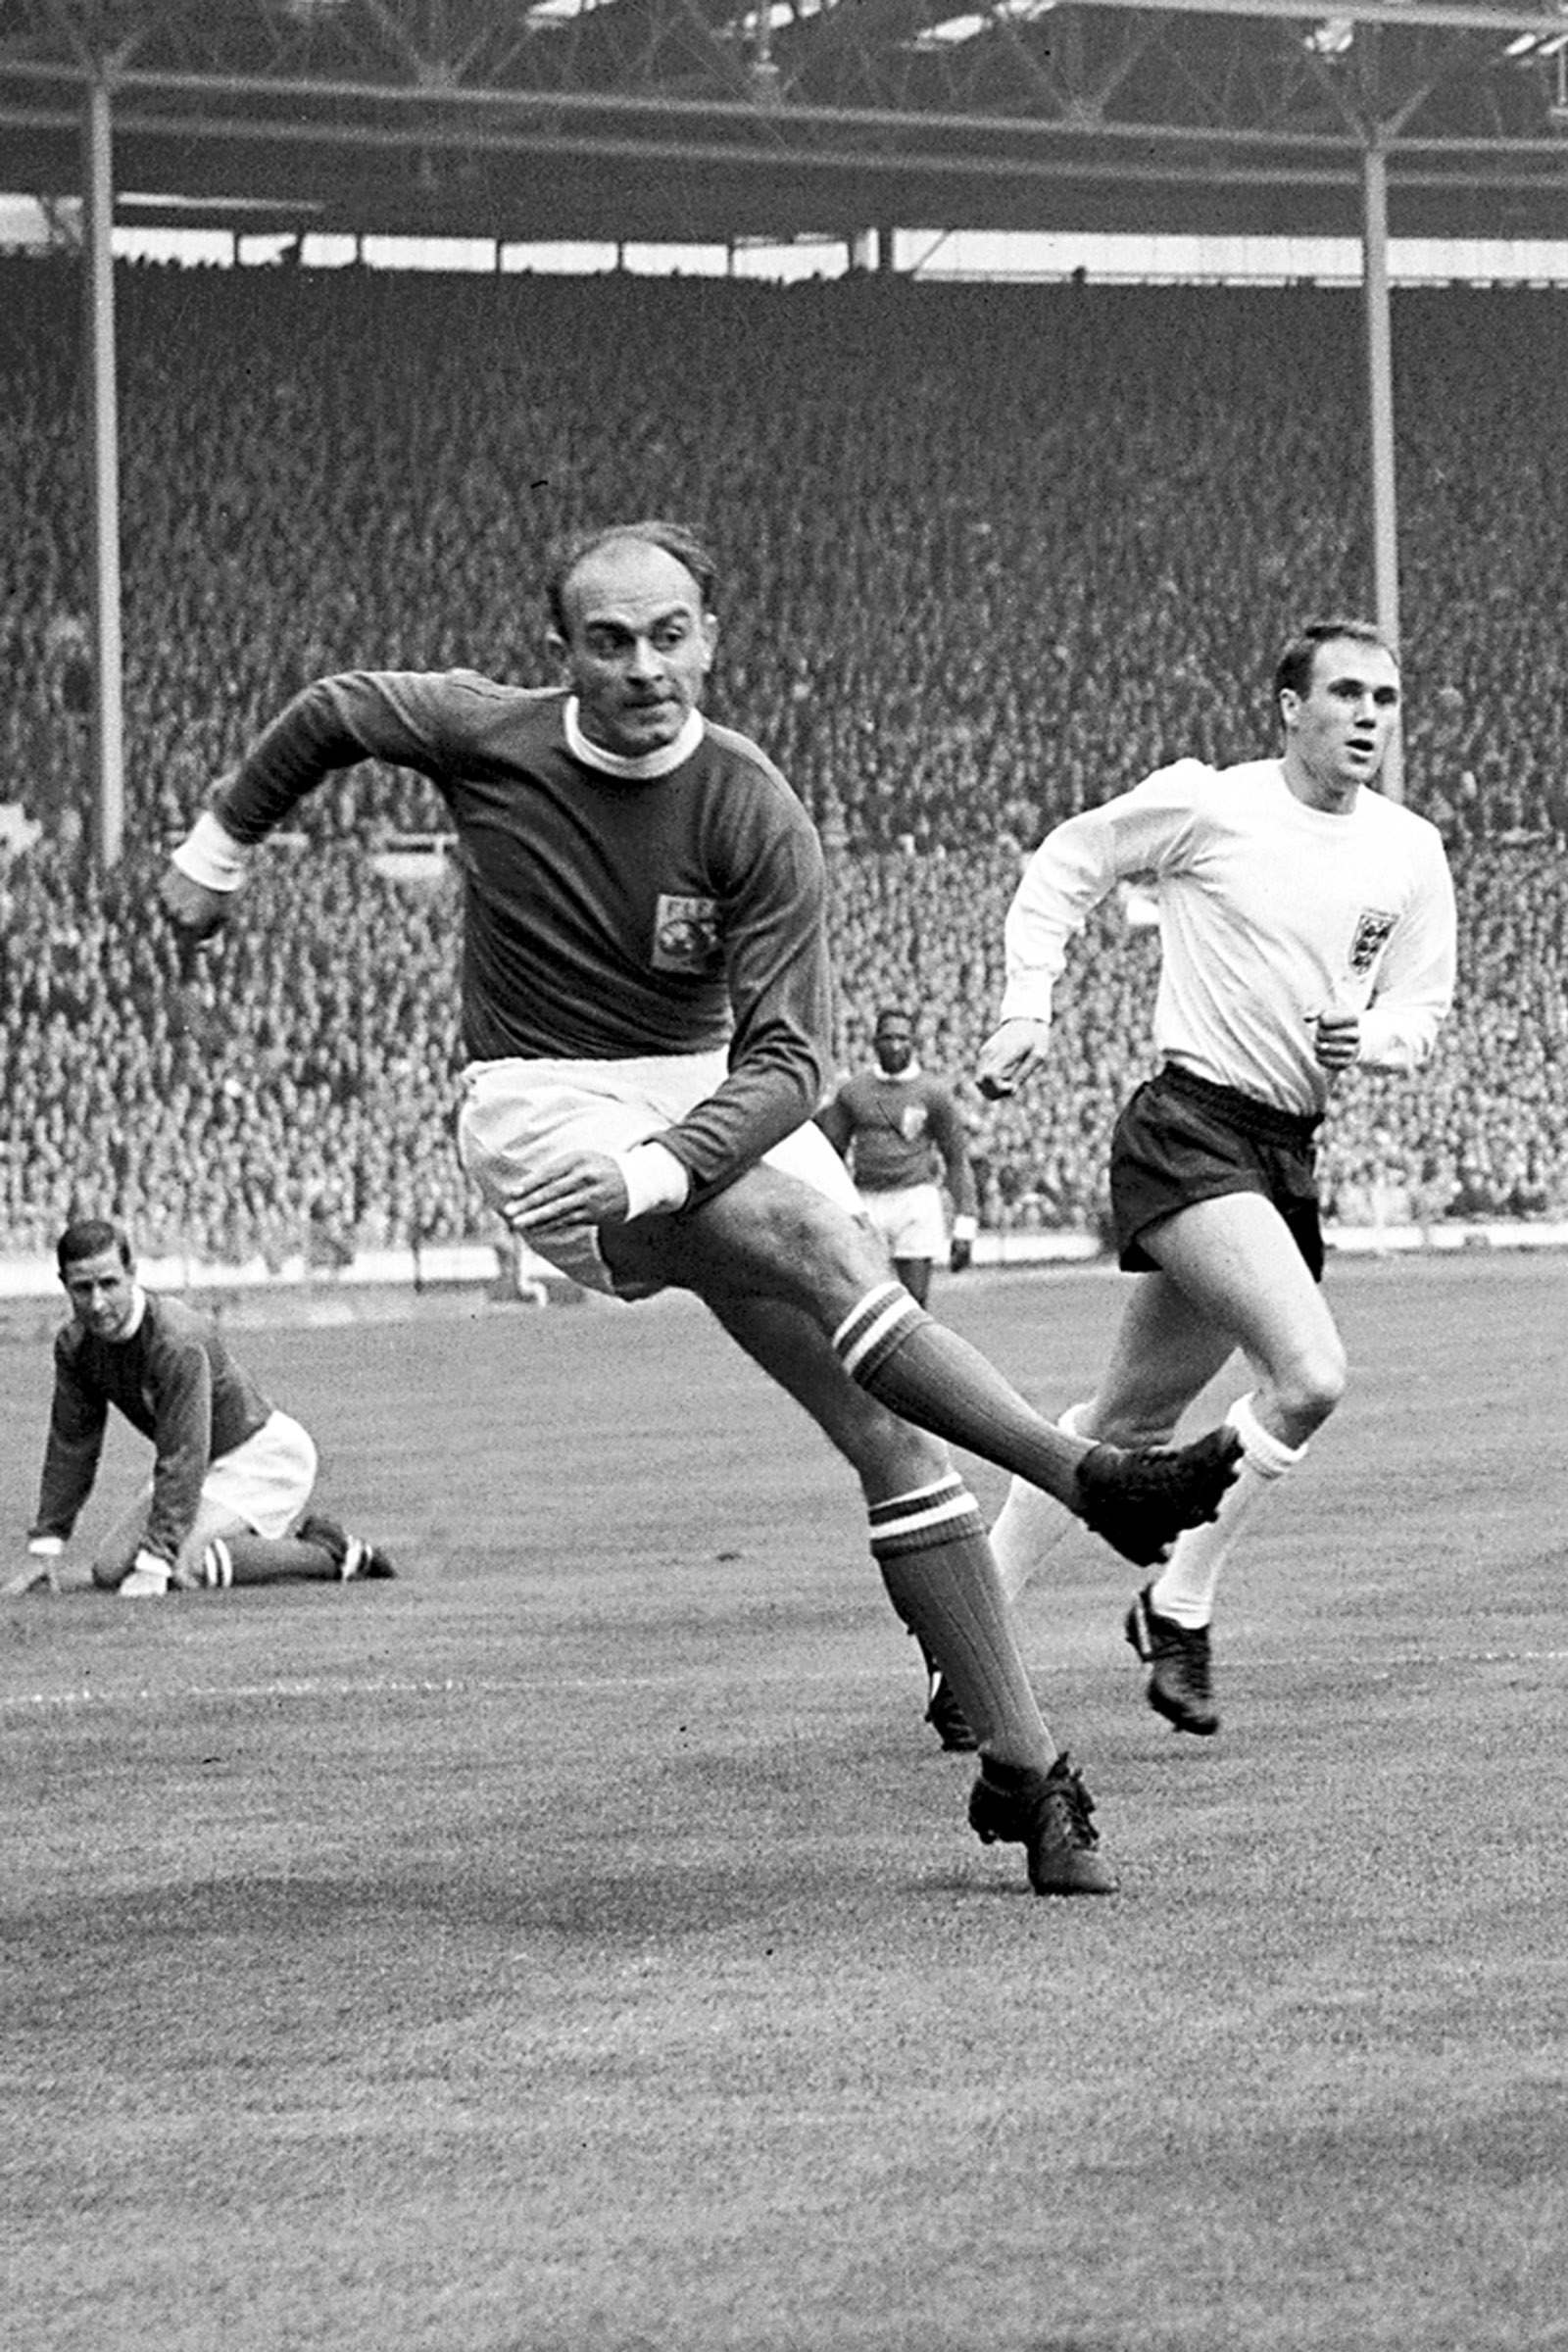 Soccer - FA 100th Anniversary Match - England v Rest of the World Rest of the World's Alfredo di Stefano (l) fires a shot at goal, watched by England's Ray Wilson (r) Date: 23/10/1963